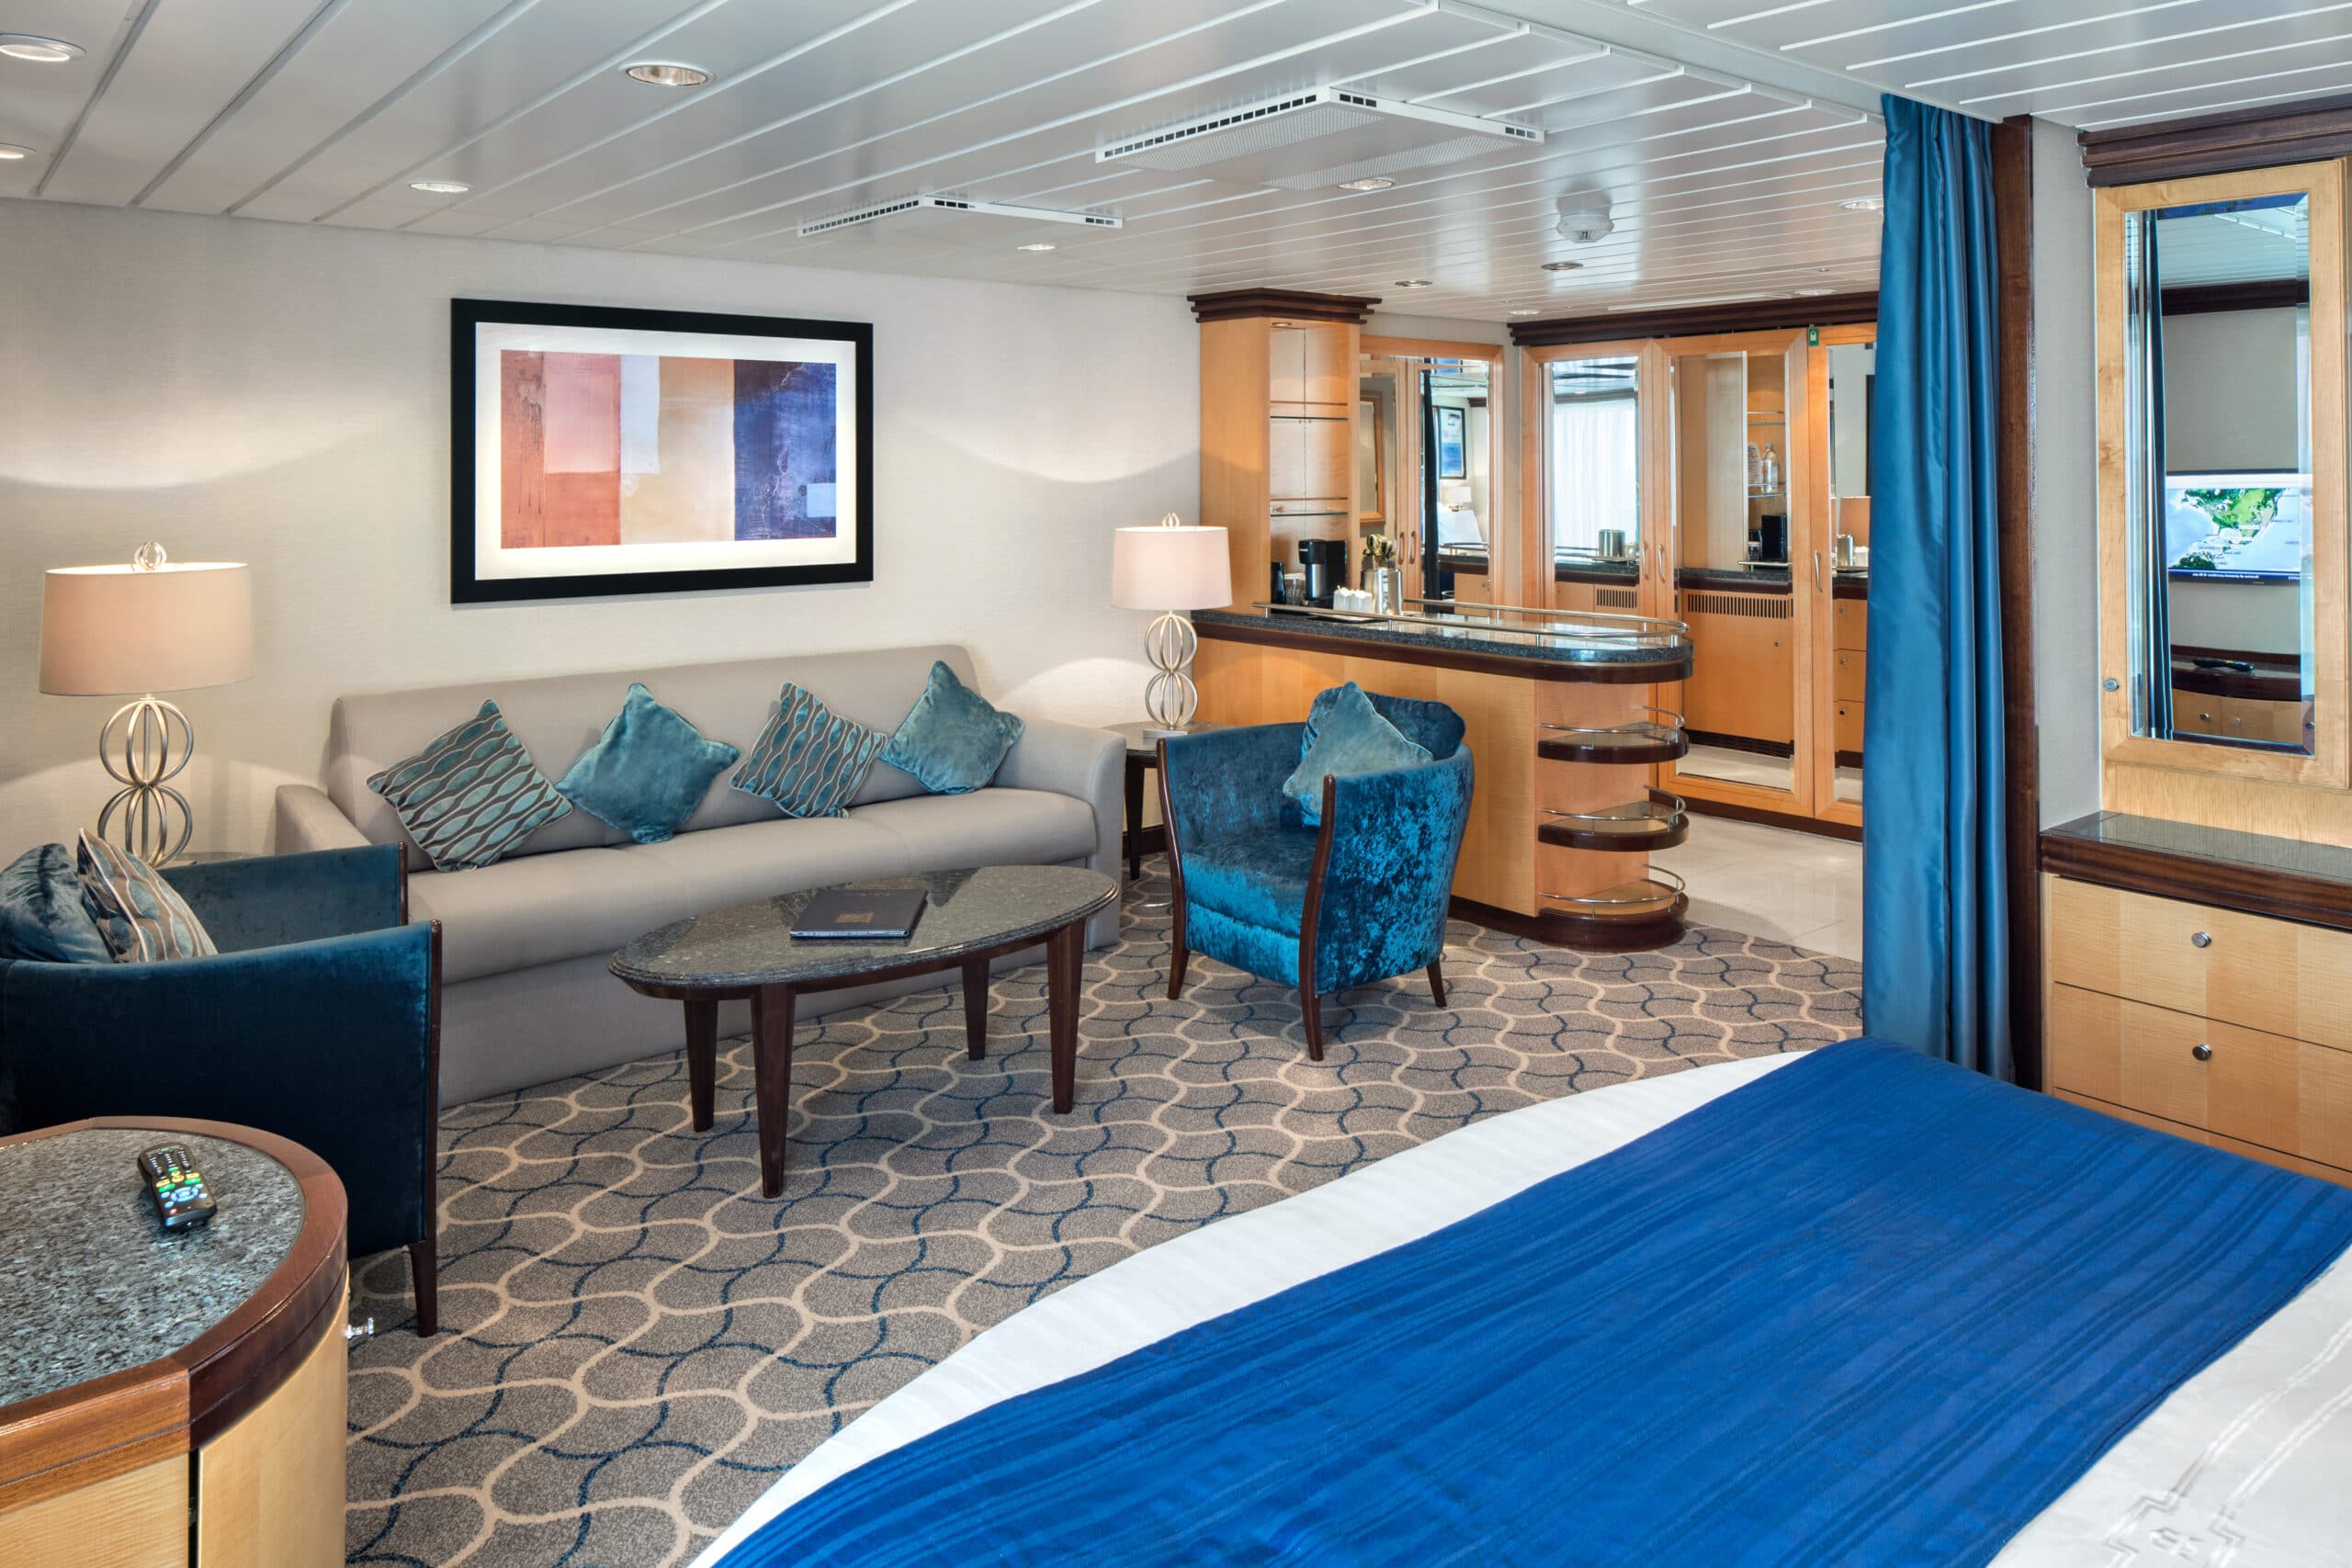 Royal-Caribbean-International-Freedom-Liberty-Independence-of-the-seas-schip-cruiseschip-categorie-GS-GT-Grand-Suite-two-bedroom